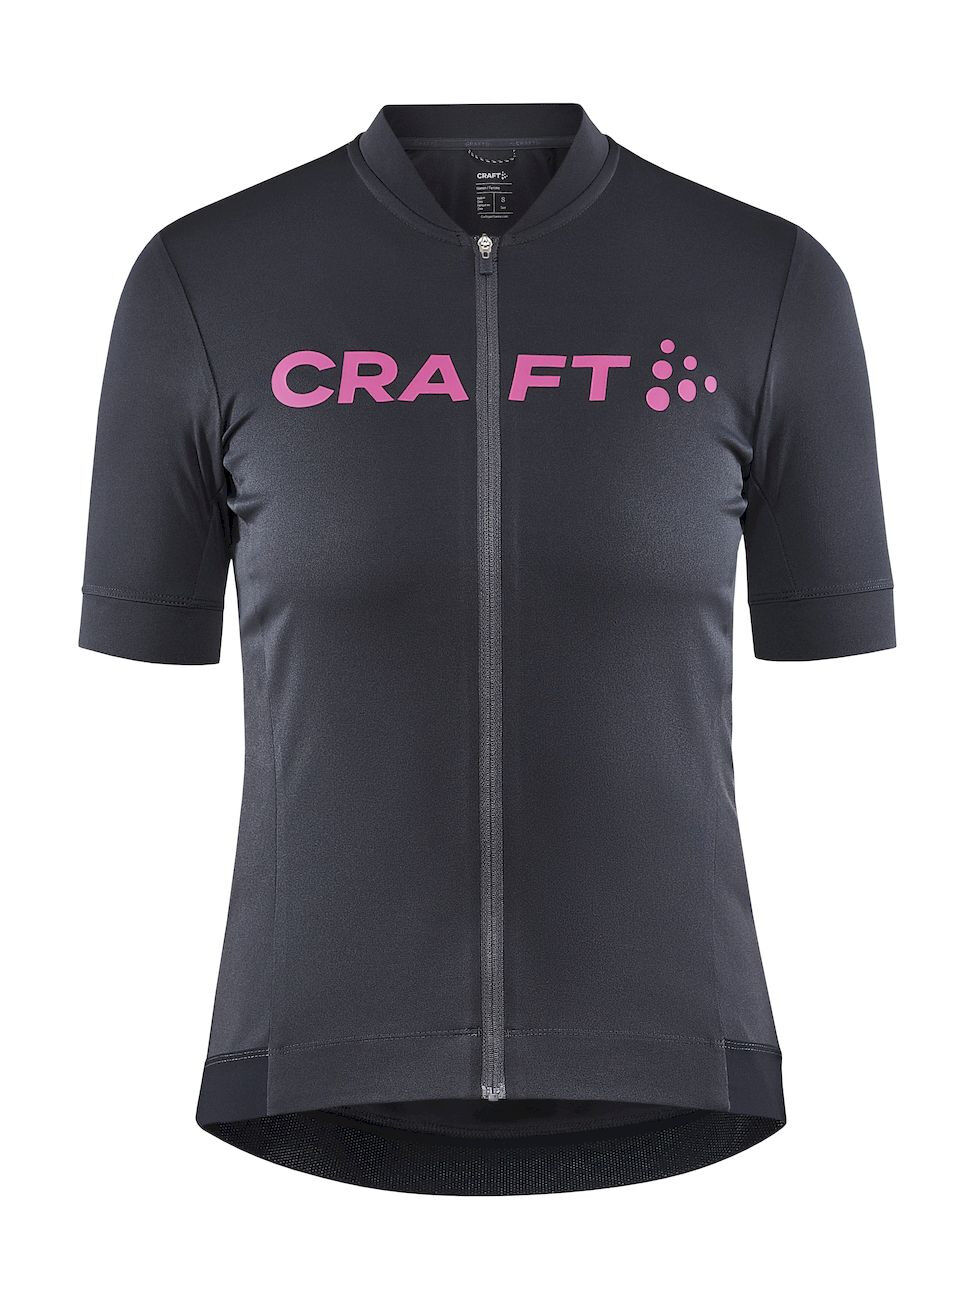 Craft Essence Jersey - Maillot ciclismo - Mujer